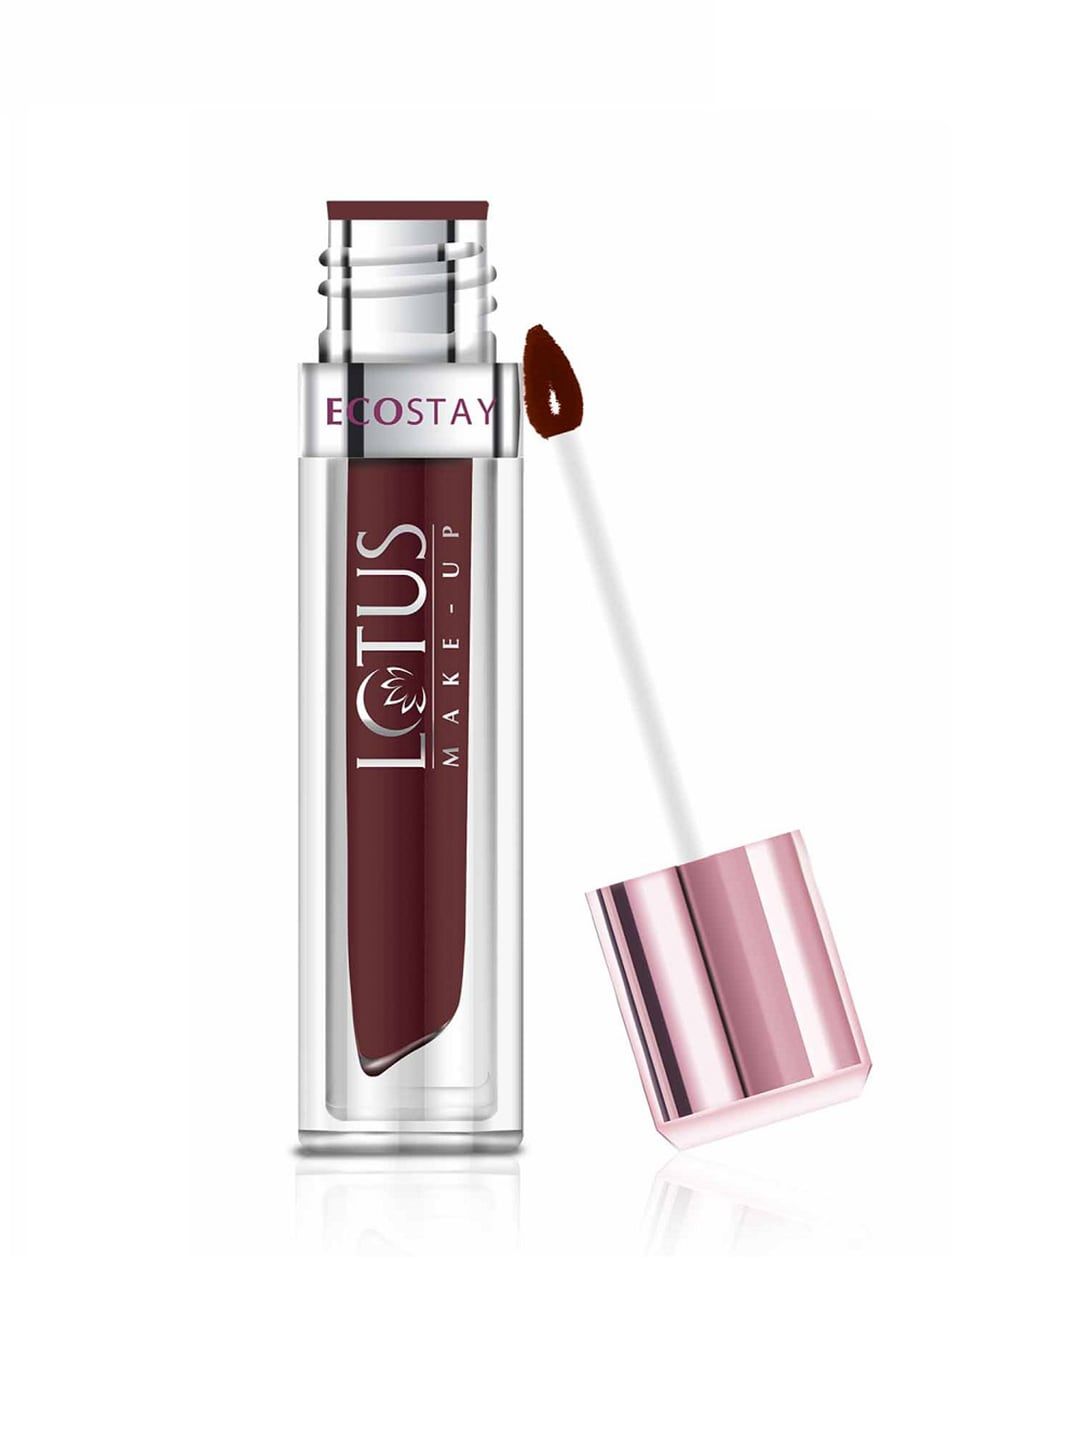 Lotus Herbals Sustainable Ecostay All That Wine Matte Lip Lacquer EL20 Price in India